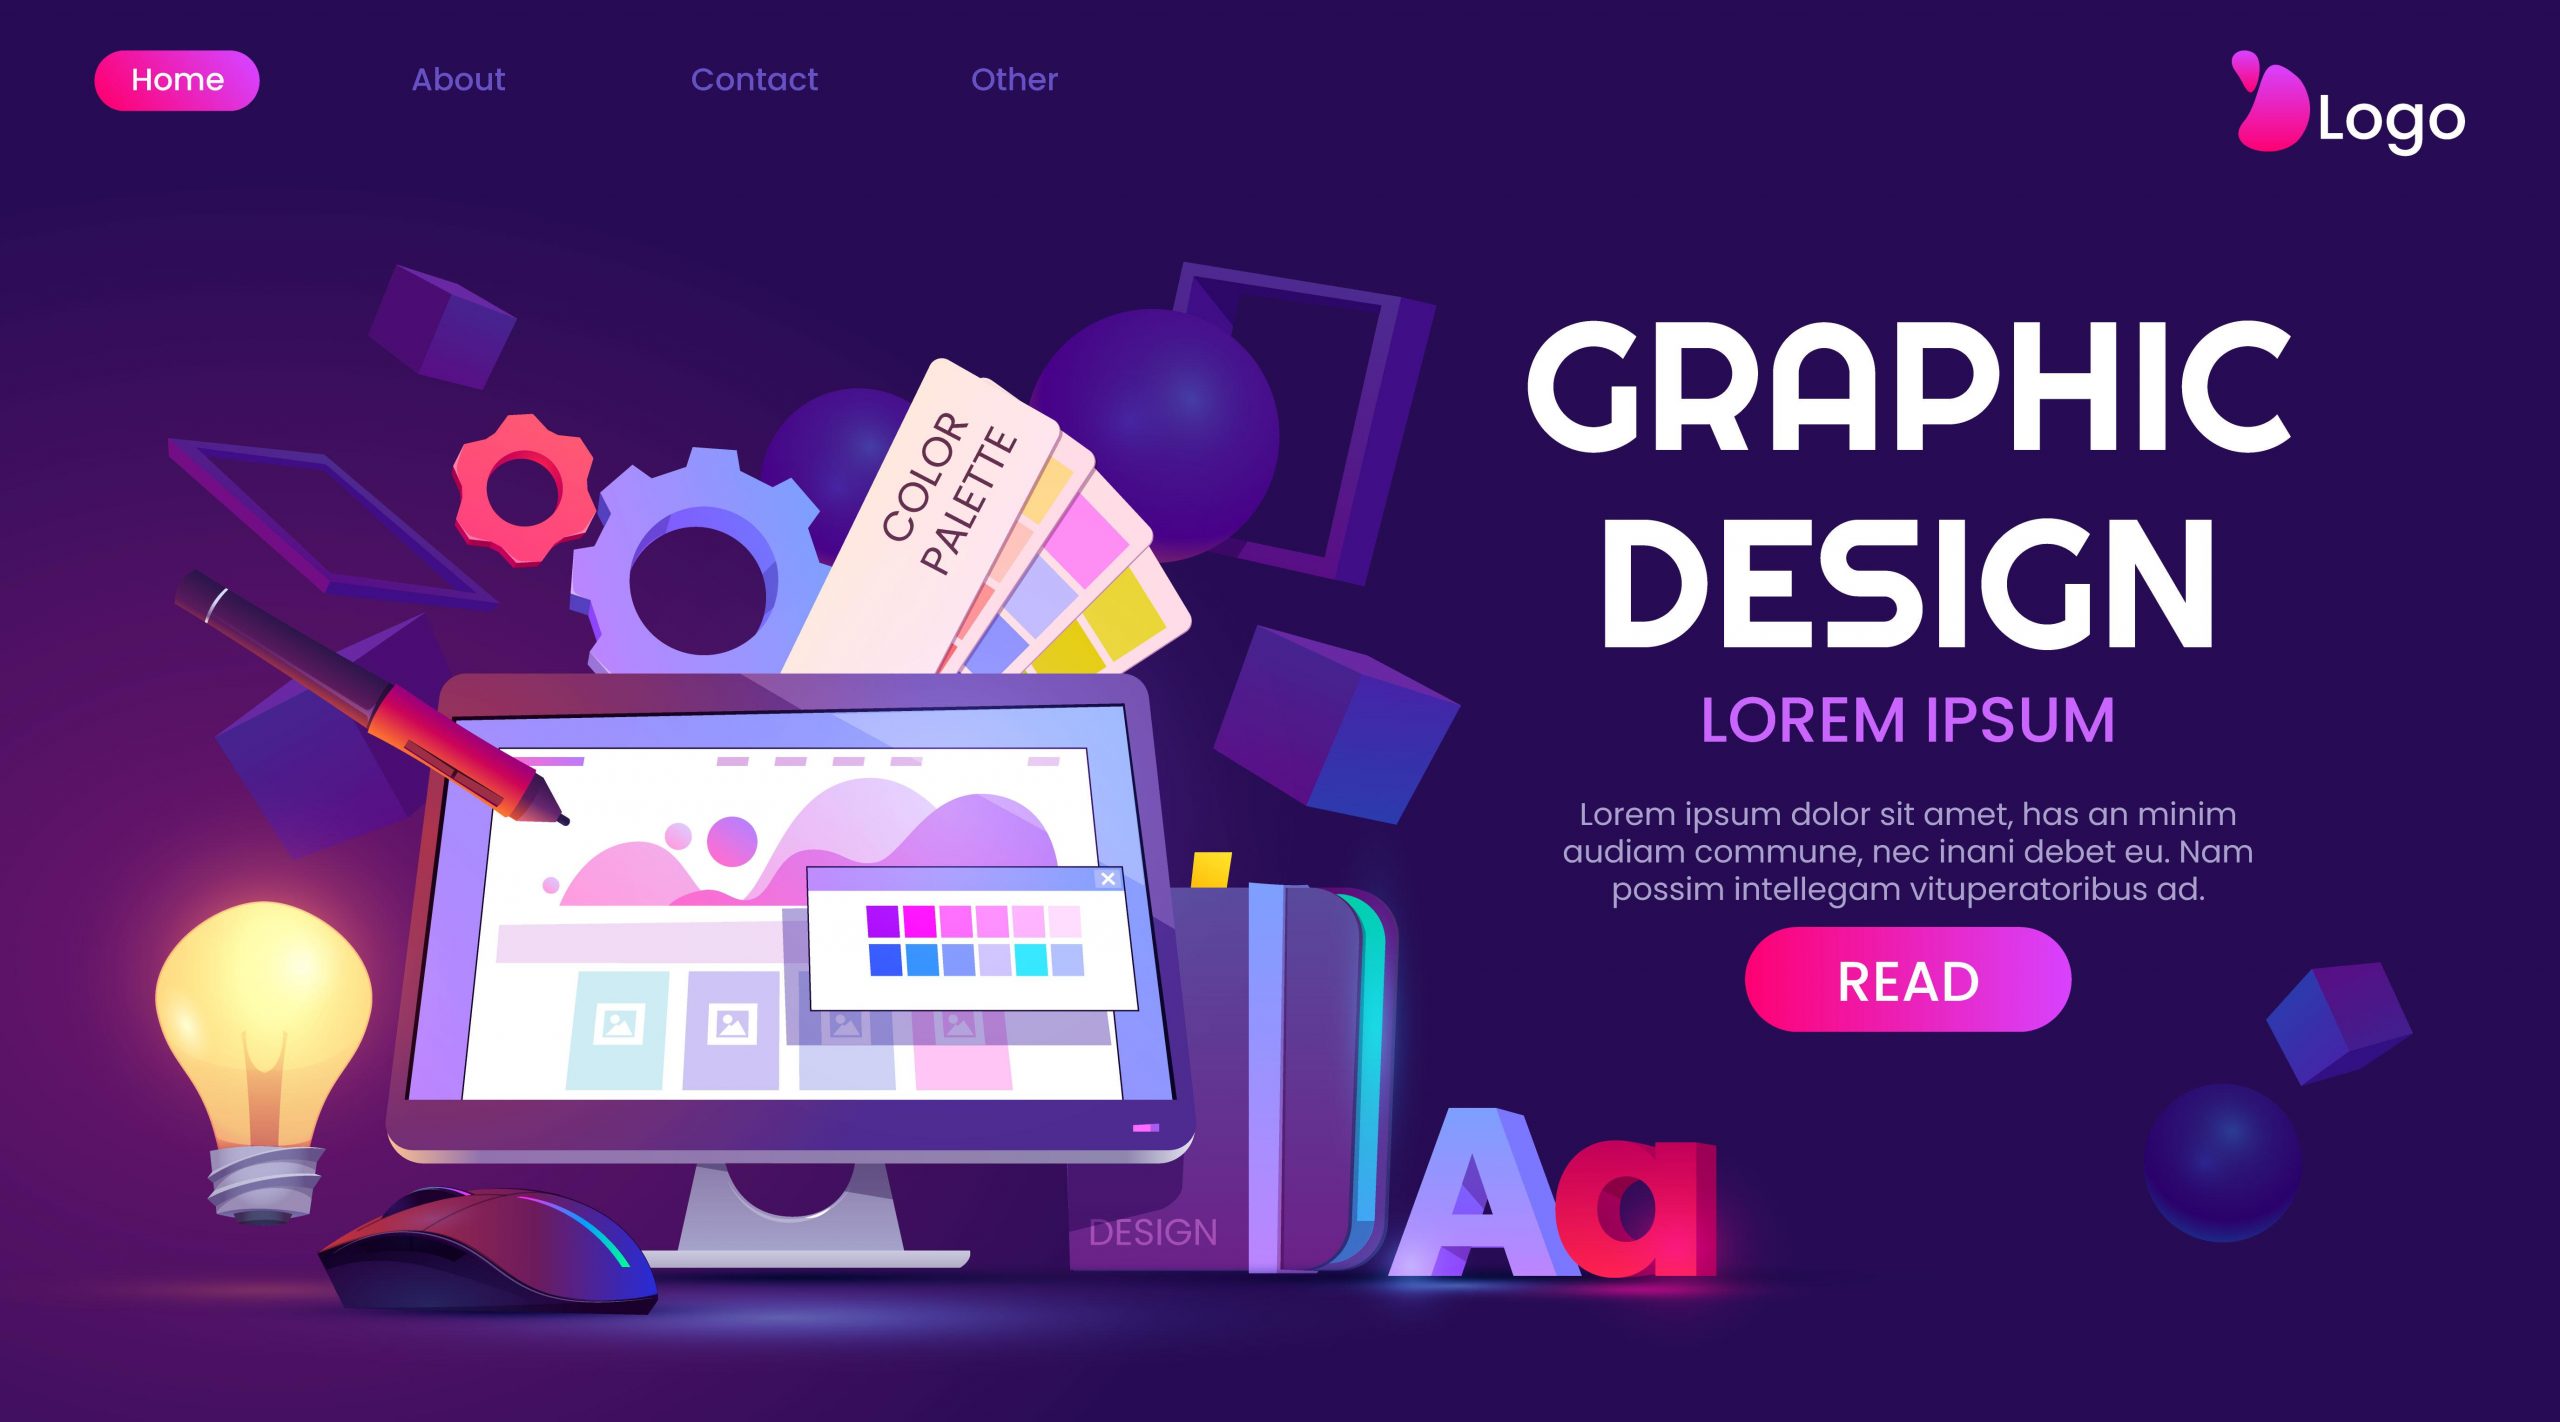 6 Reasons Why Graphic Design Is Important For Your Business